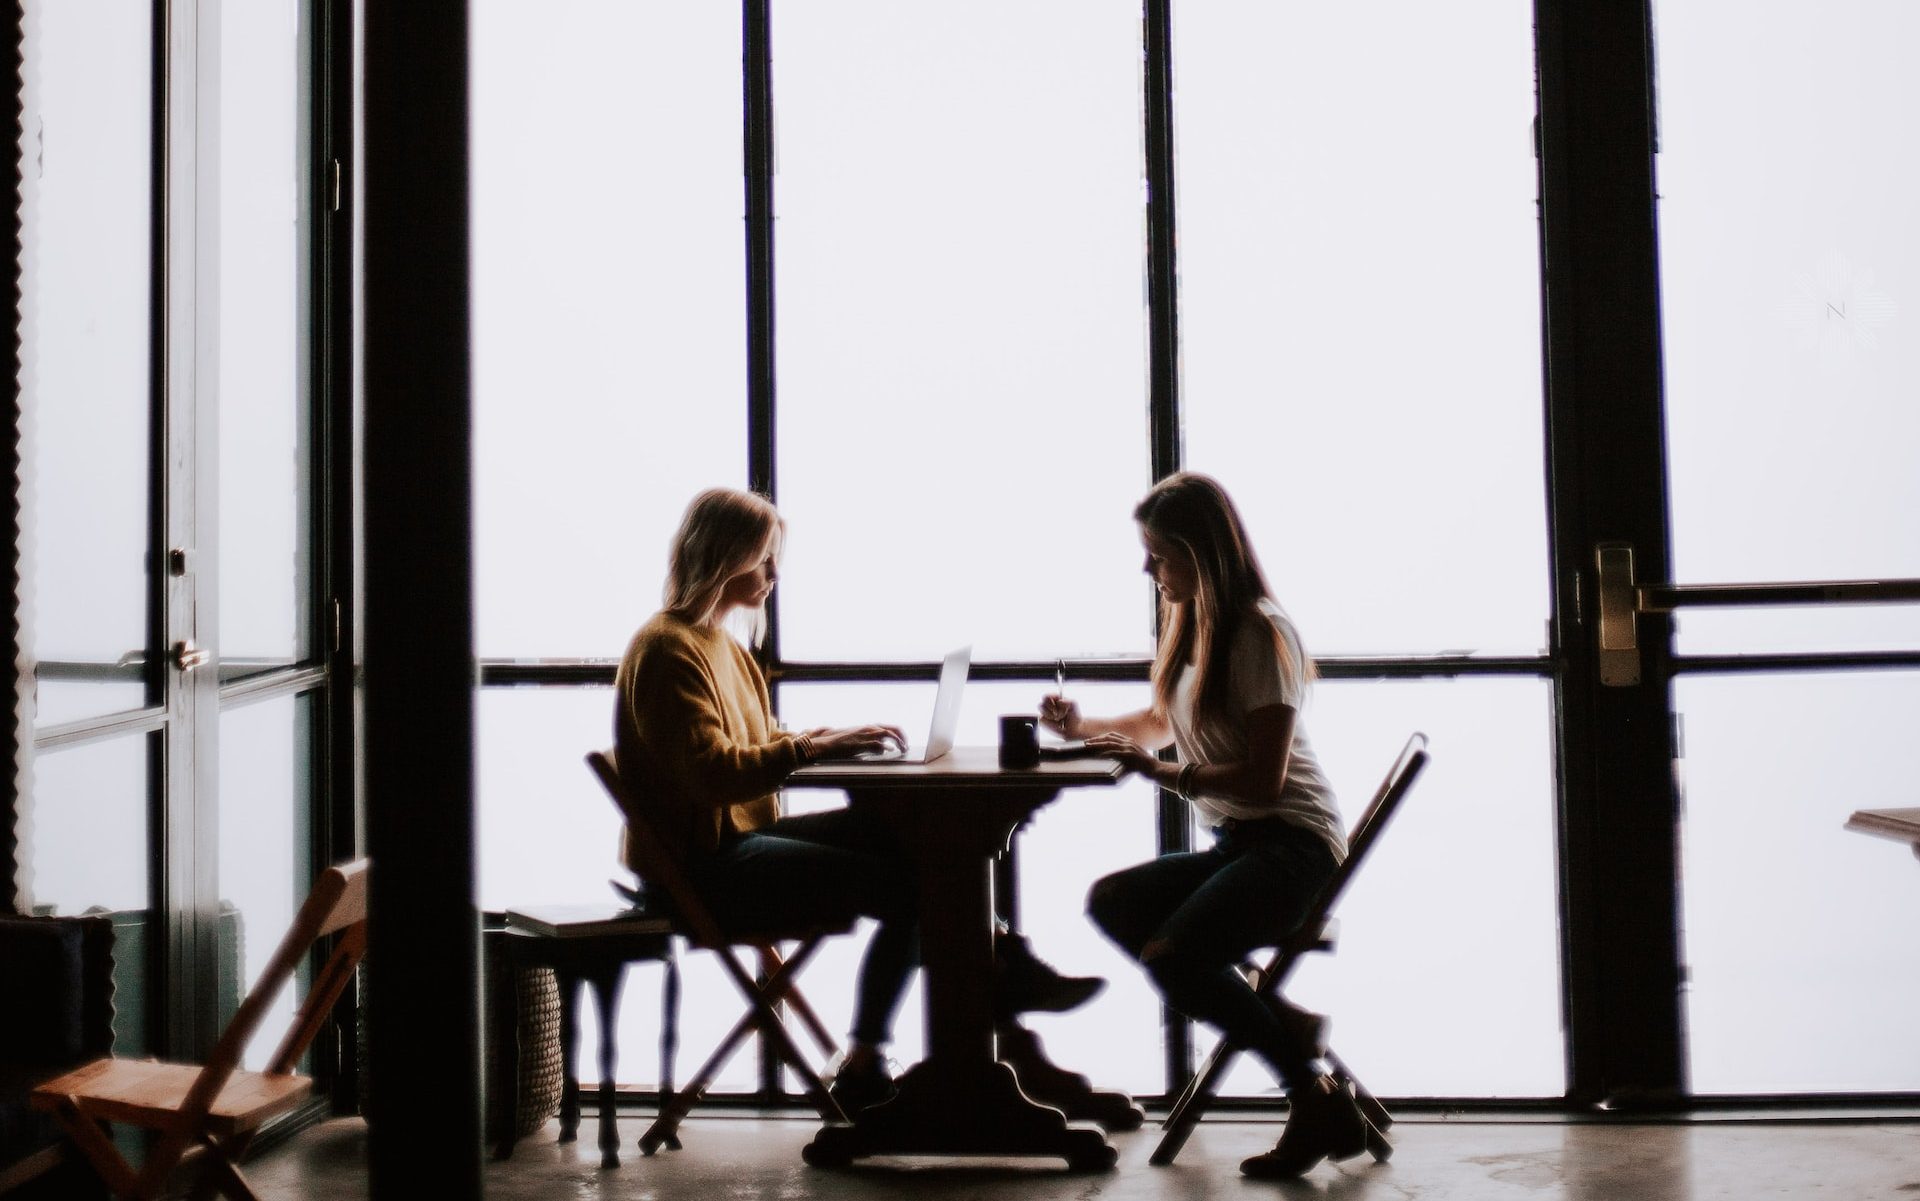 Silhouette of two people sitting in a coffee shop next to large windows